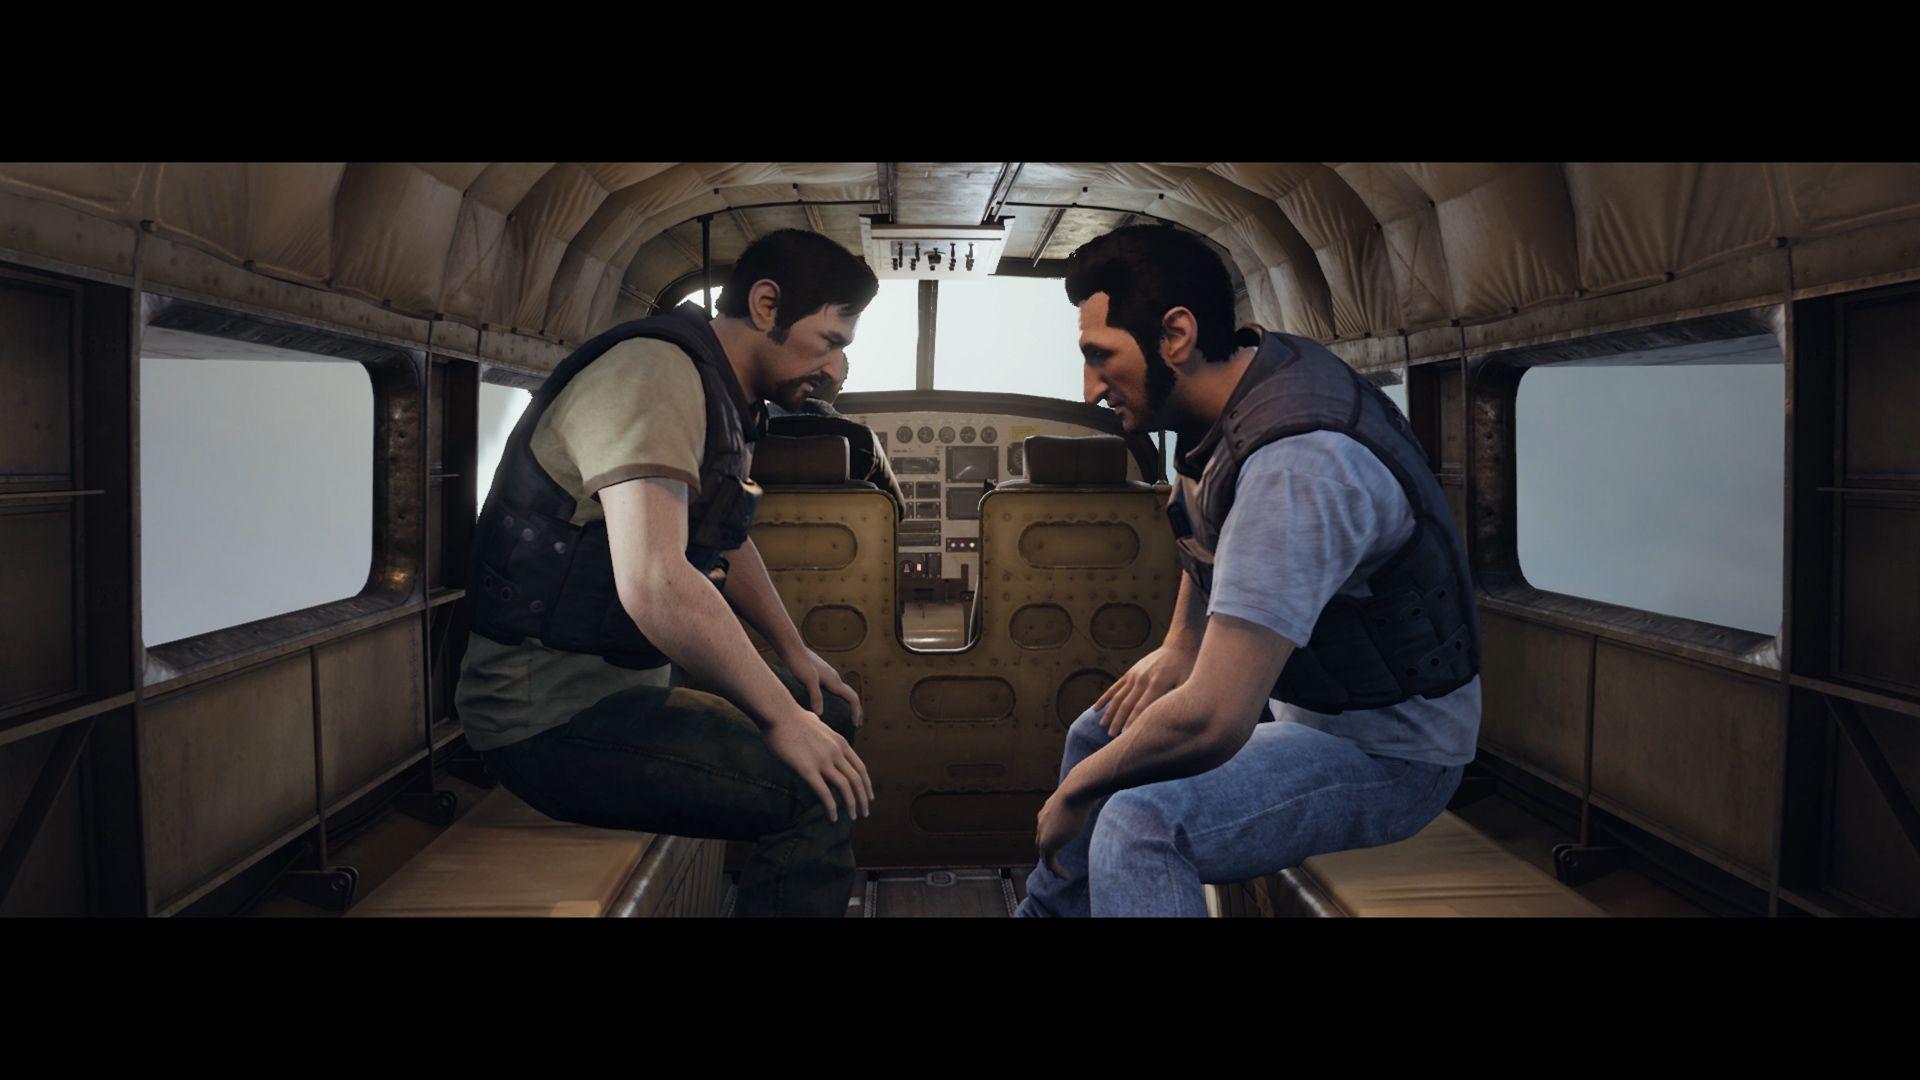 A Way Out Review: Bring a Friend